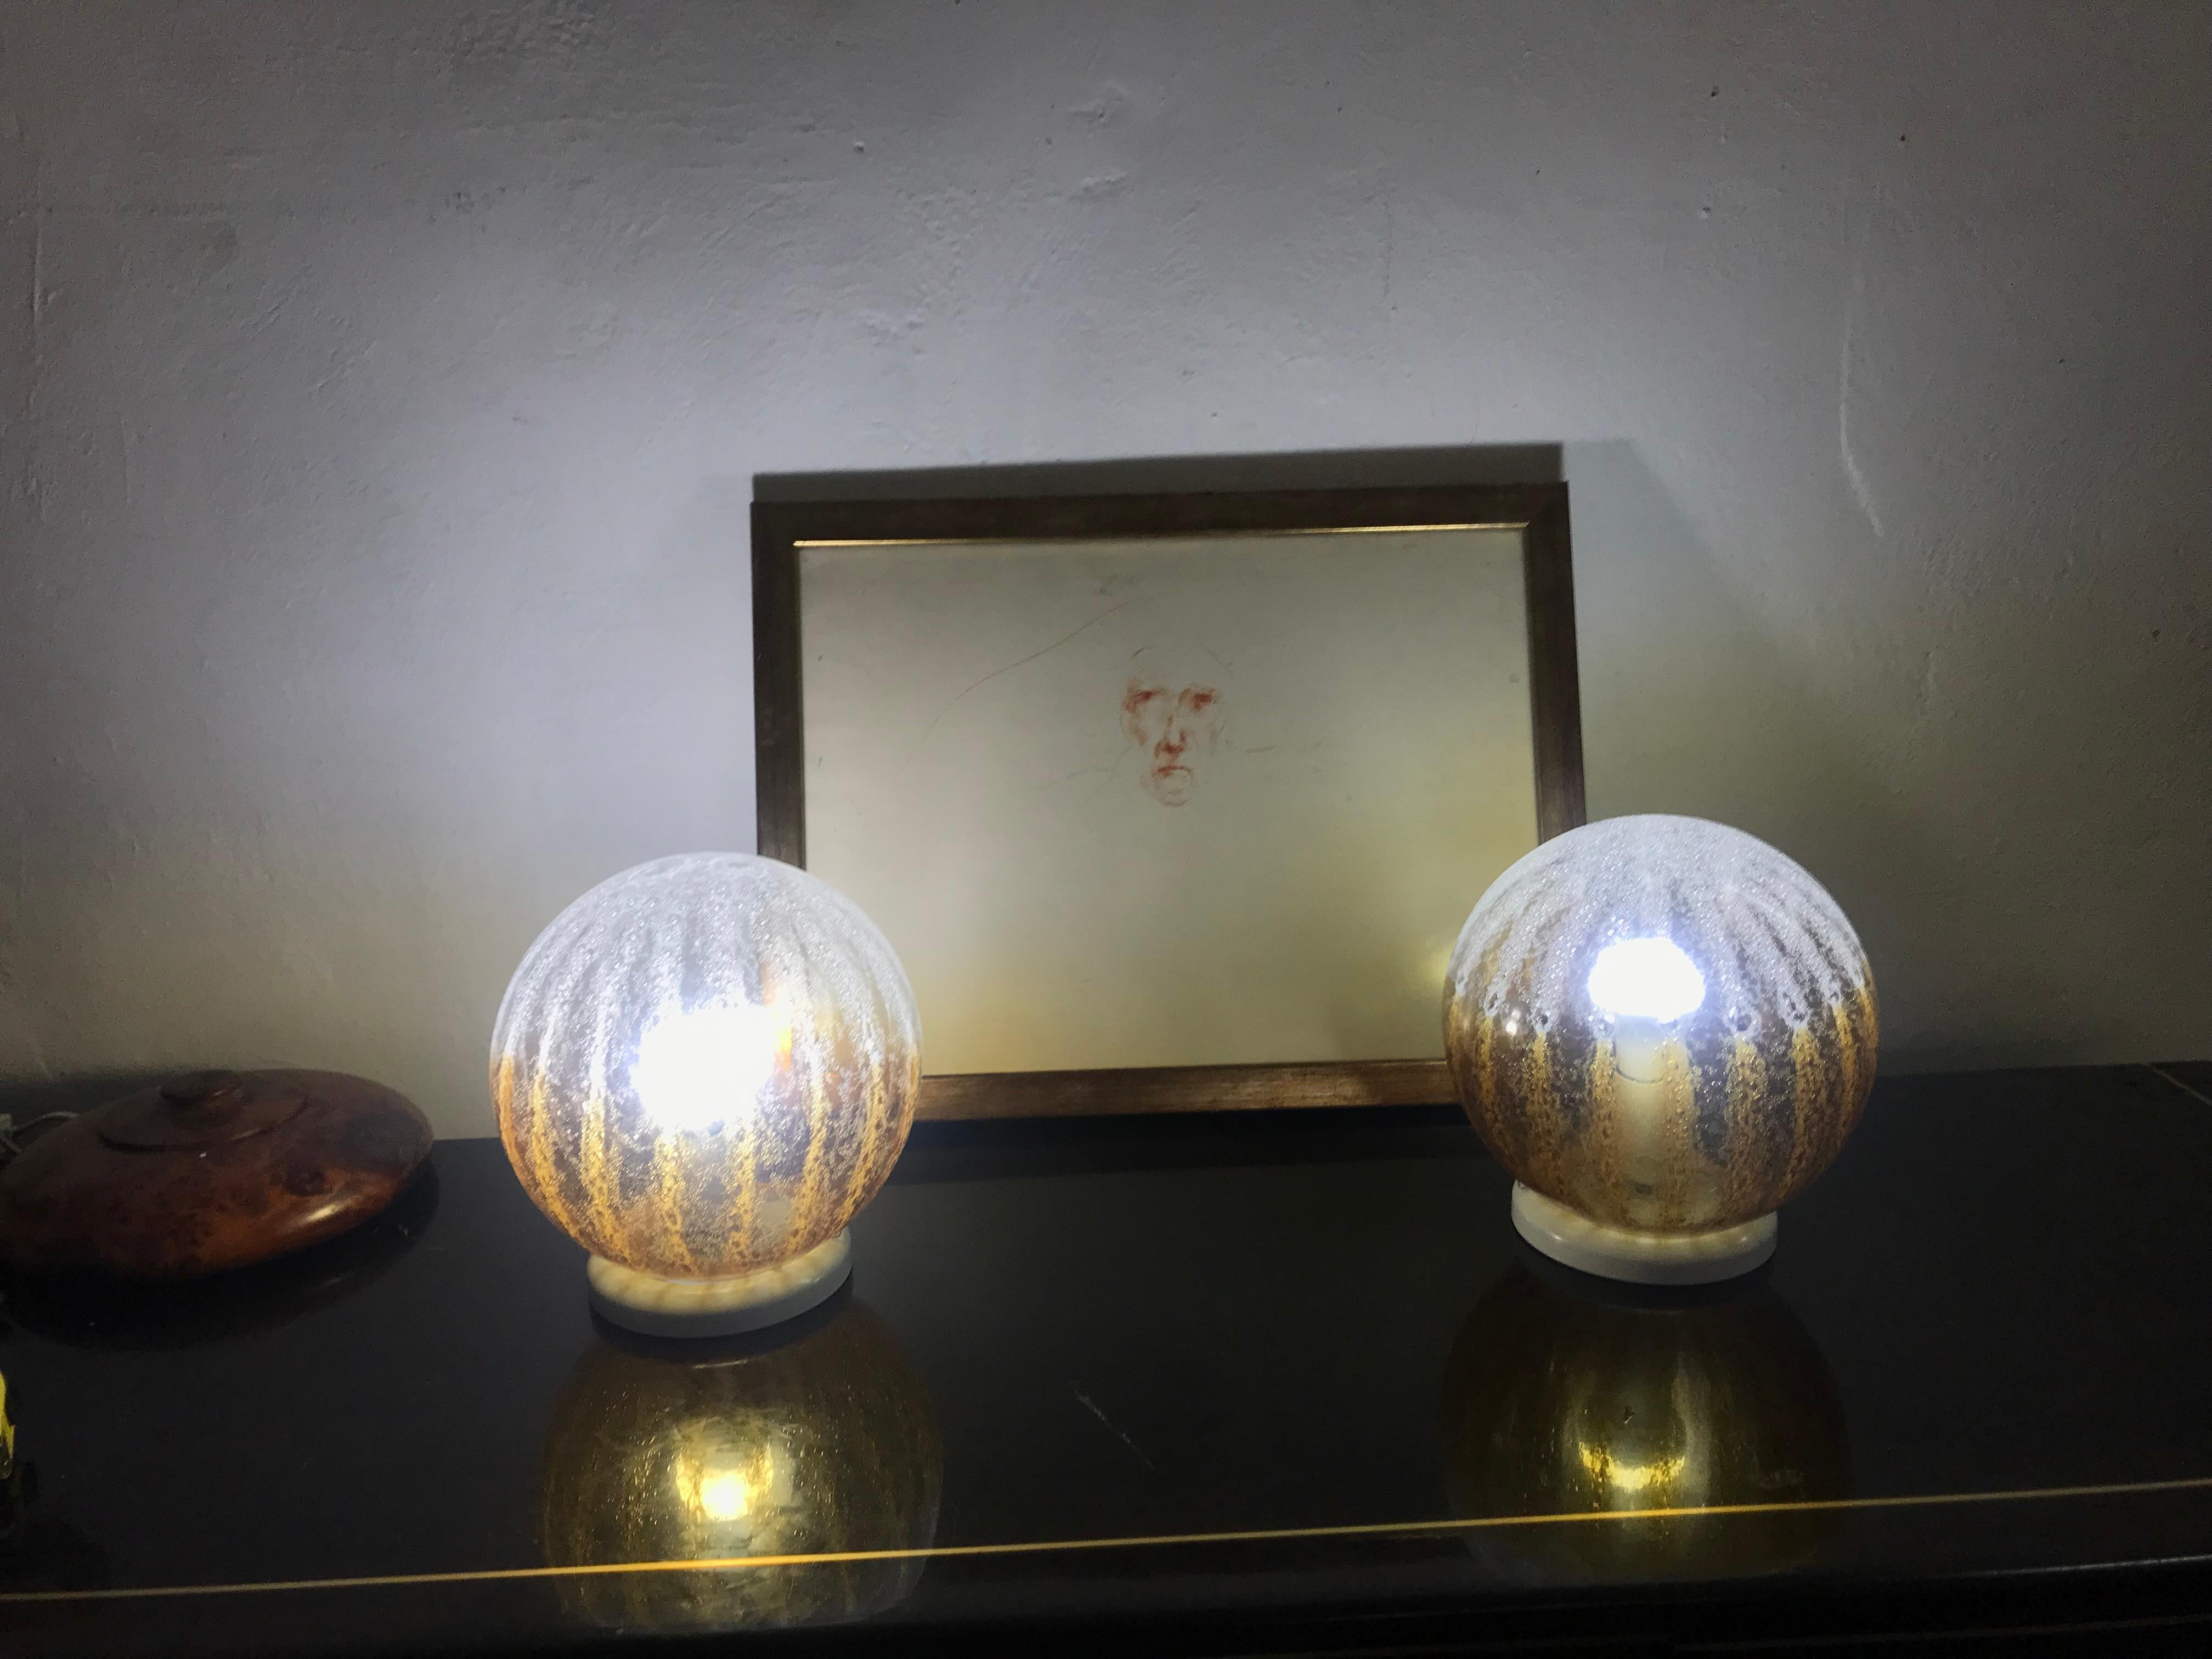 Pair of Mid-Century Modern Table Lamp by Mazzega in Murano Glass, circa 1960 In Good Condition For Sale In Merida, Yucatan